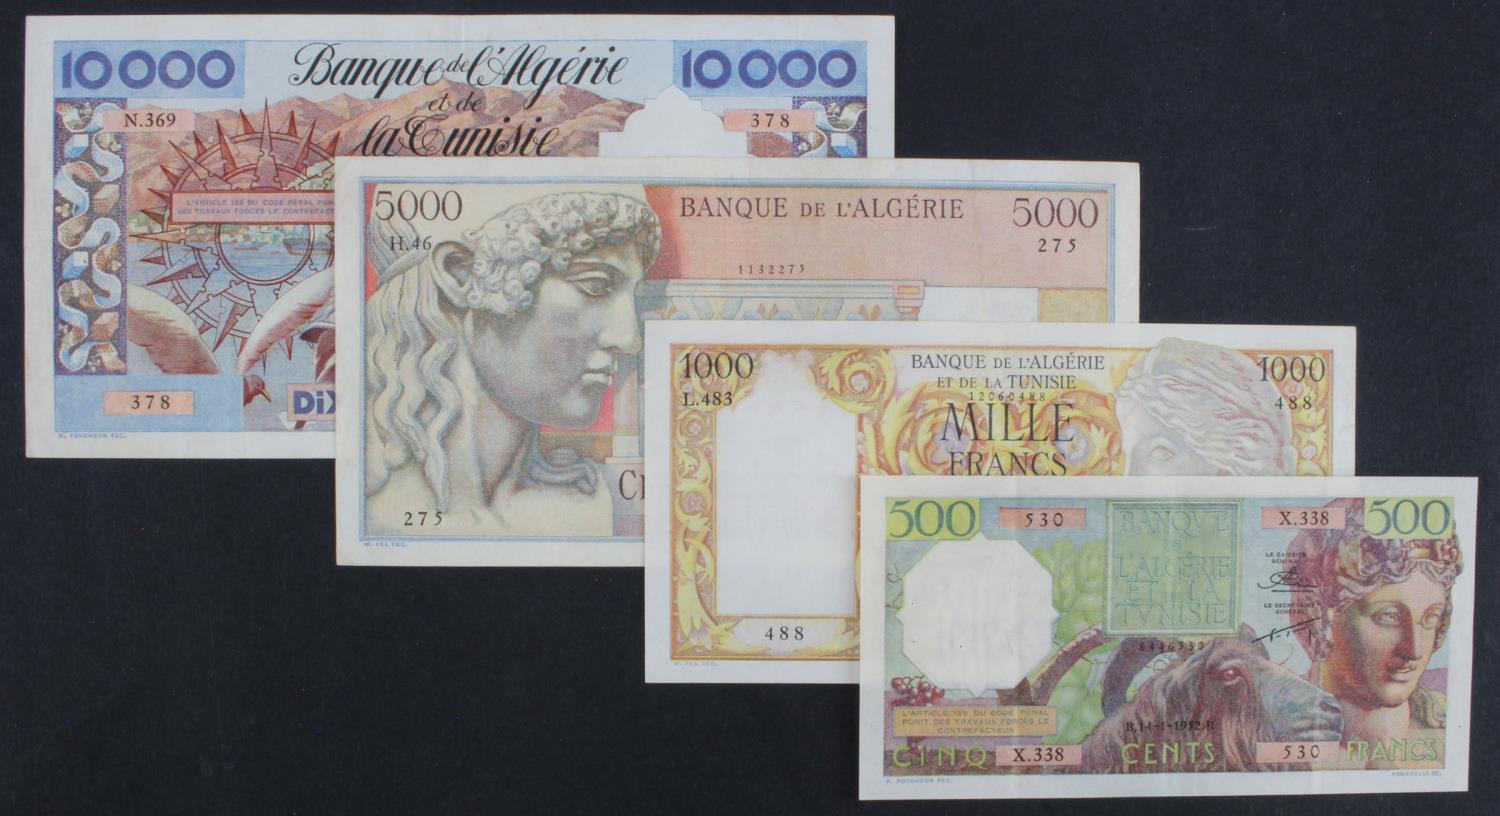 Algeria (4), 10000, 5000, 1000 and 500 Francs dated 1957, 1947, 1949 and 1952 respectively (BNB B201